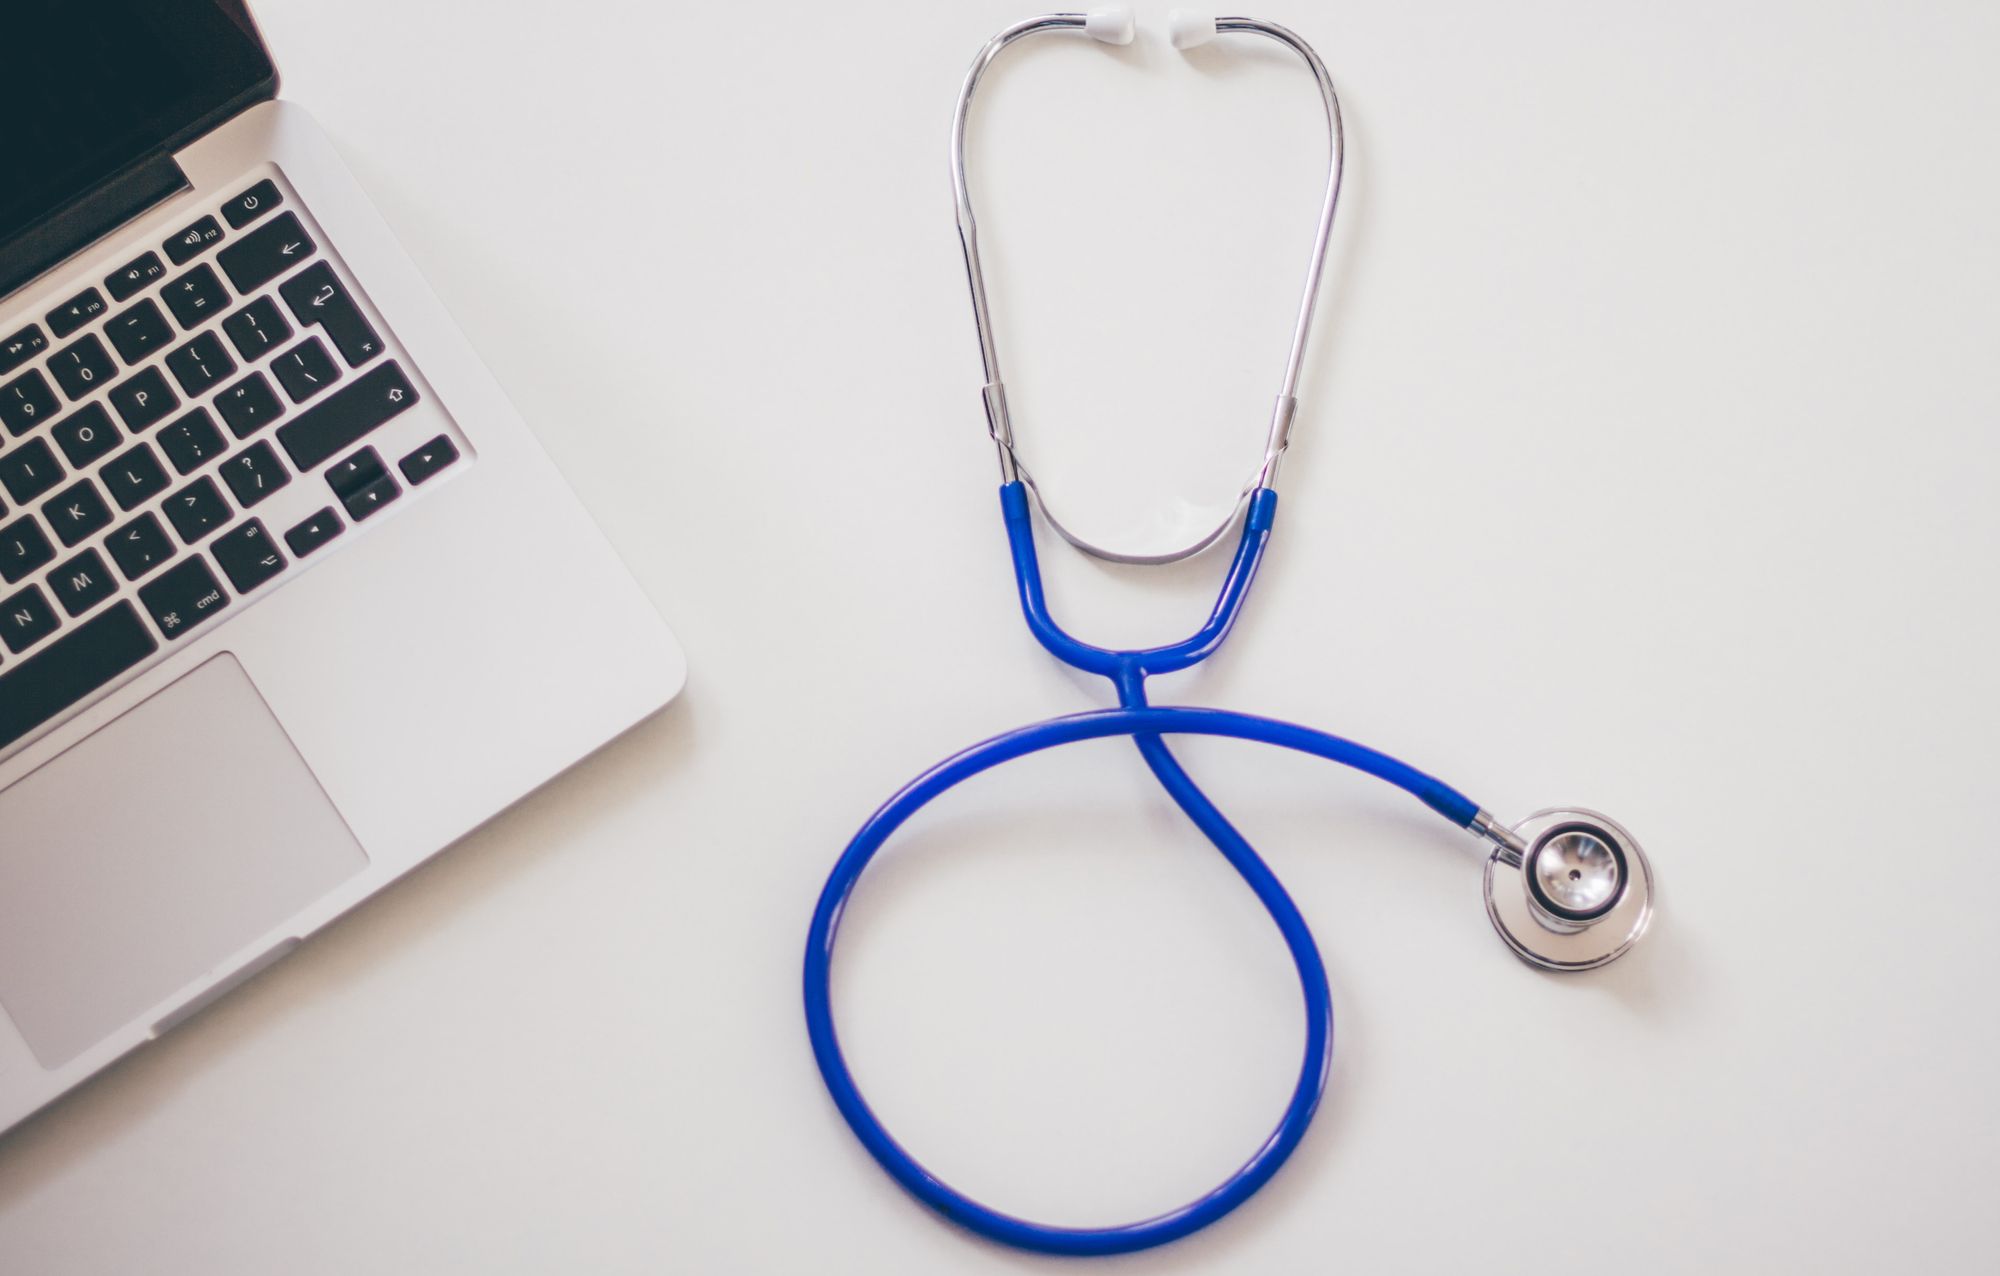 Telehealth vs. Telemedicine: What's the Difference Between Them?